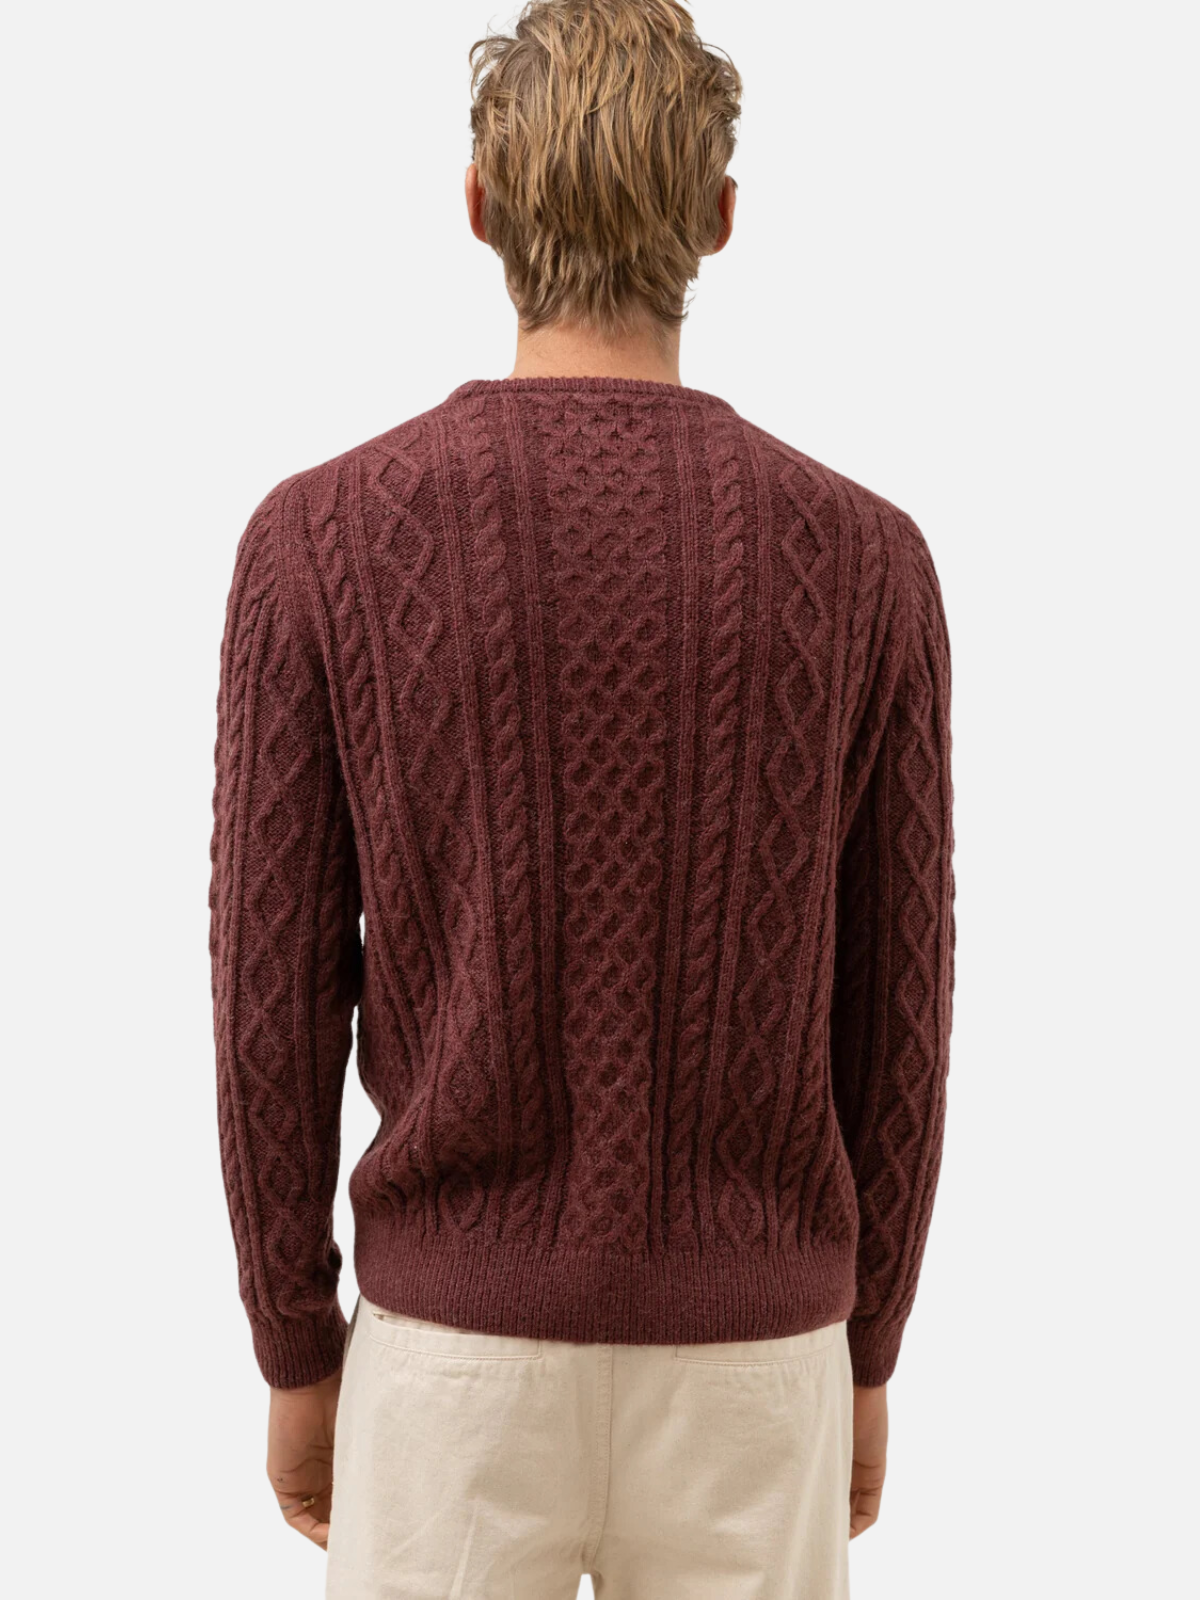 rhythm mohair fisherman cable knit sweater red maroon burgundy mulberry acrylic nylon wool kempt athens ga georgia men's clothing store